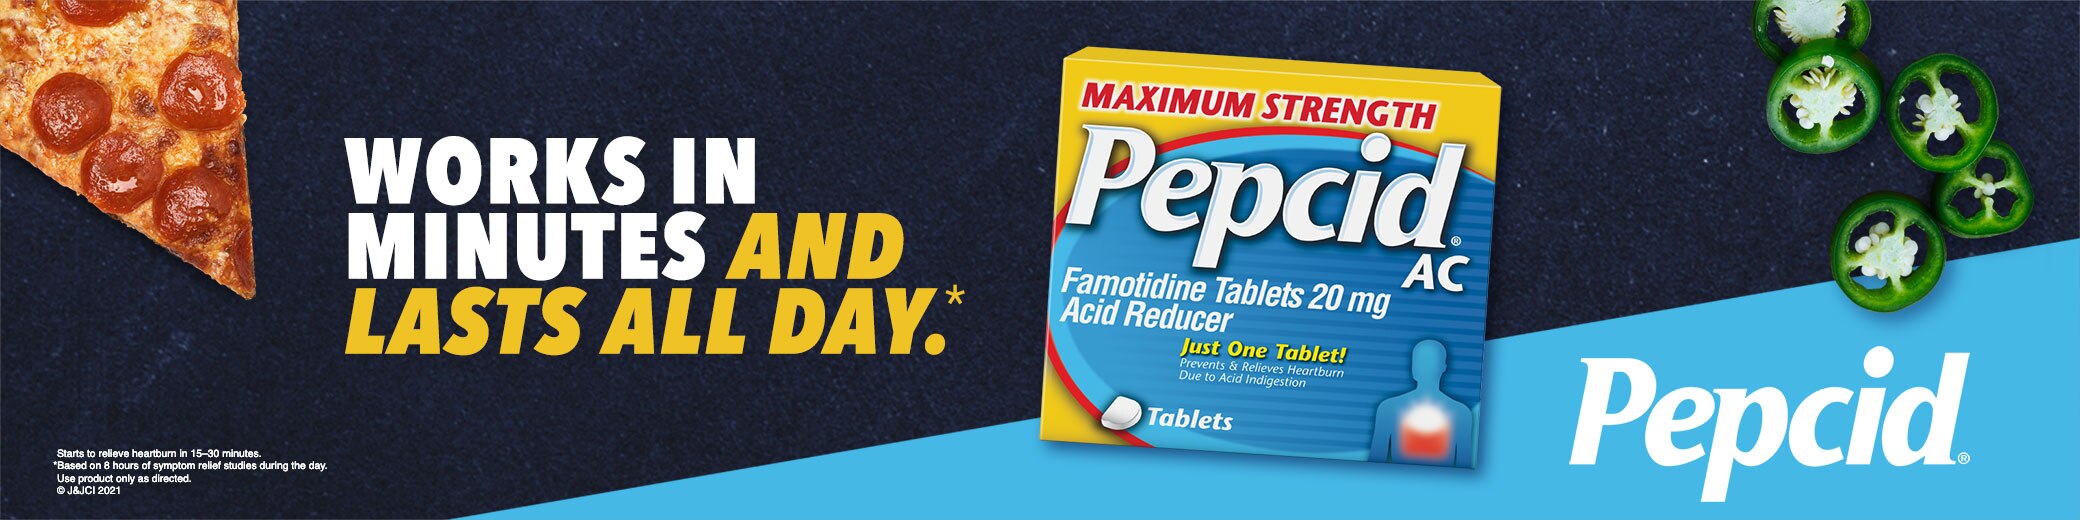 Pepcid. Works in minutes and lasts all day.* Starts to relieve heartburn in 15–30 minutes. *Based on 8 hours of symptom relief studies during the day. Usar el producto según las indicaciones. © J&JCI 2021